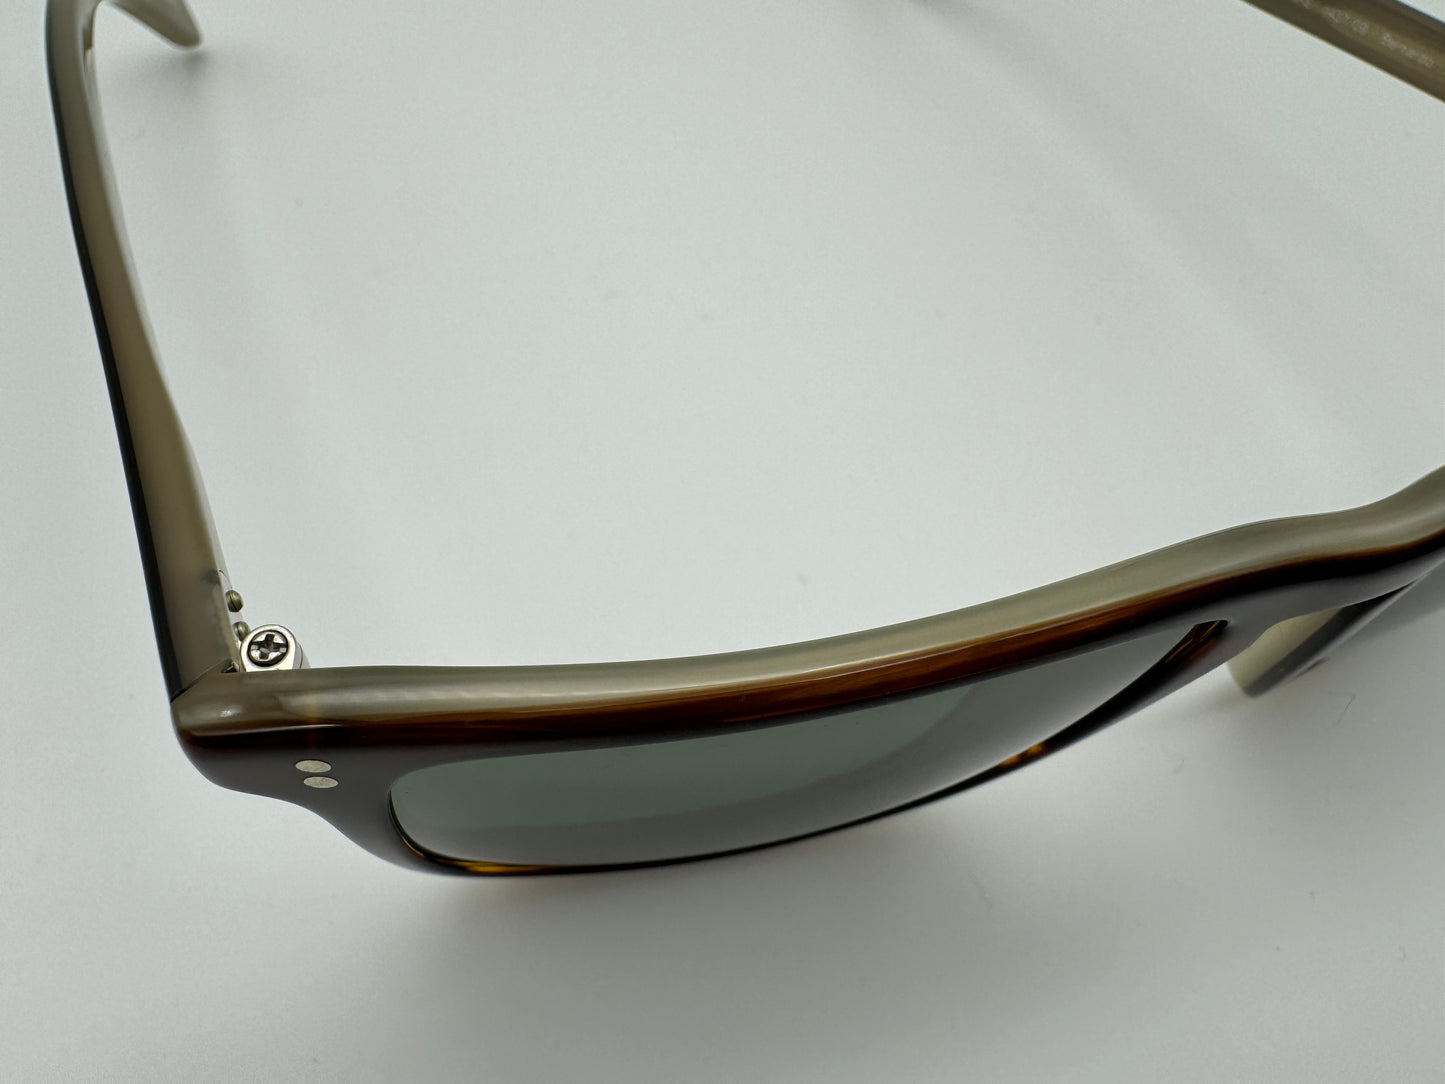 Oliver Peoples Bernardo 54mm G15 Polarized OV 5189 1437 / 09 BROWN GRADUATED WITH TAUPE INNER  Goldtone Preowned